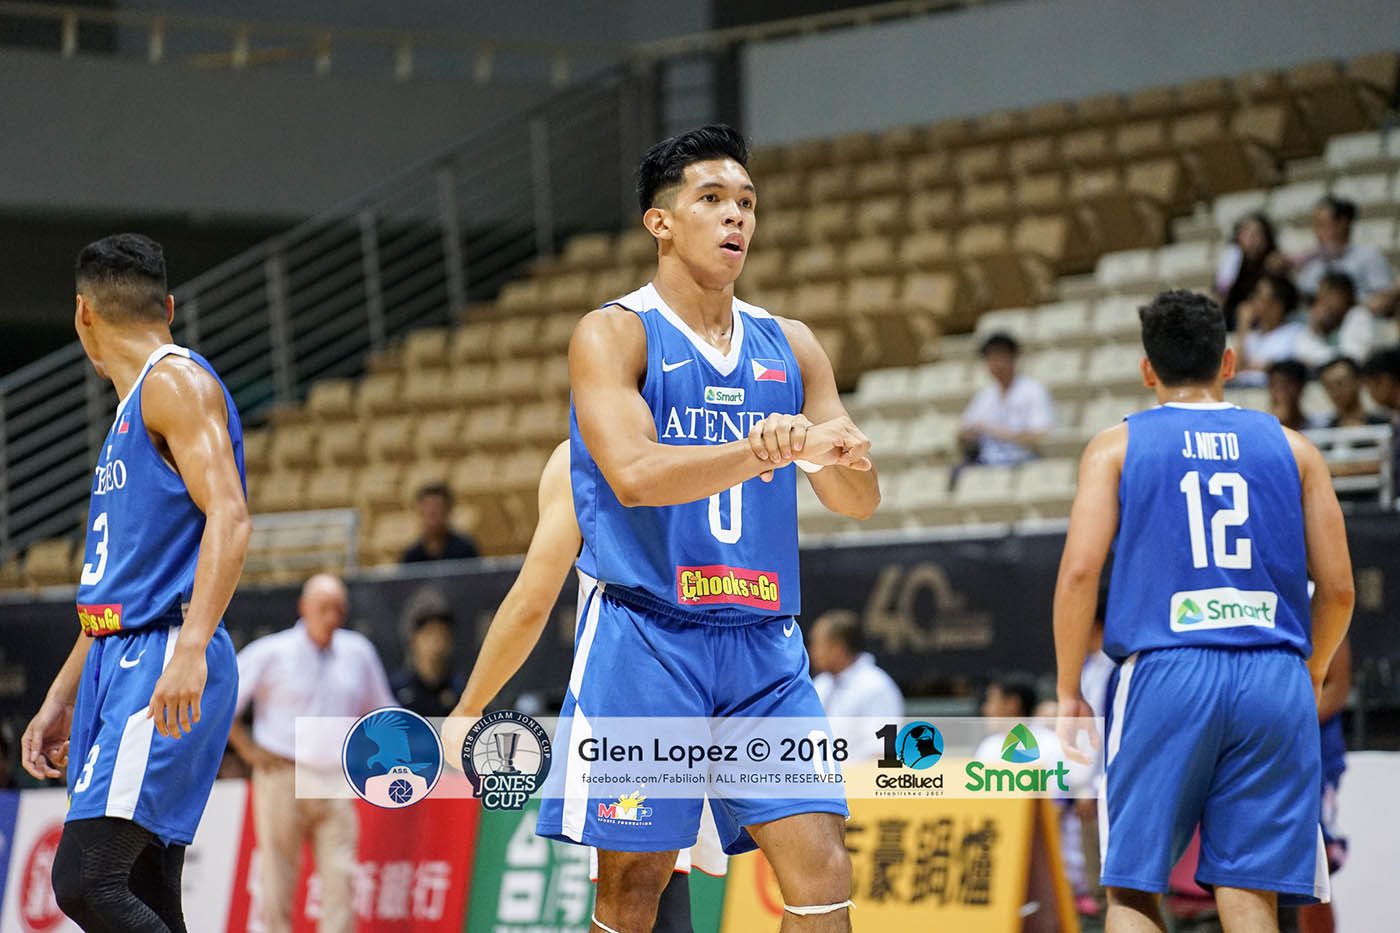 PH-Ateneo blasts Lithuania to stay on track of podium finish